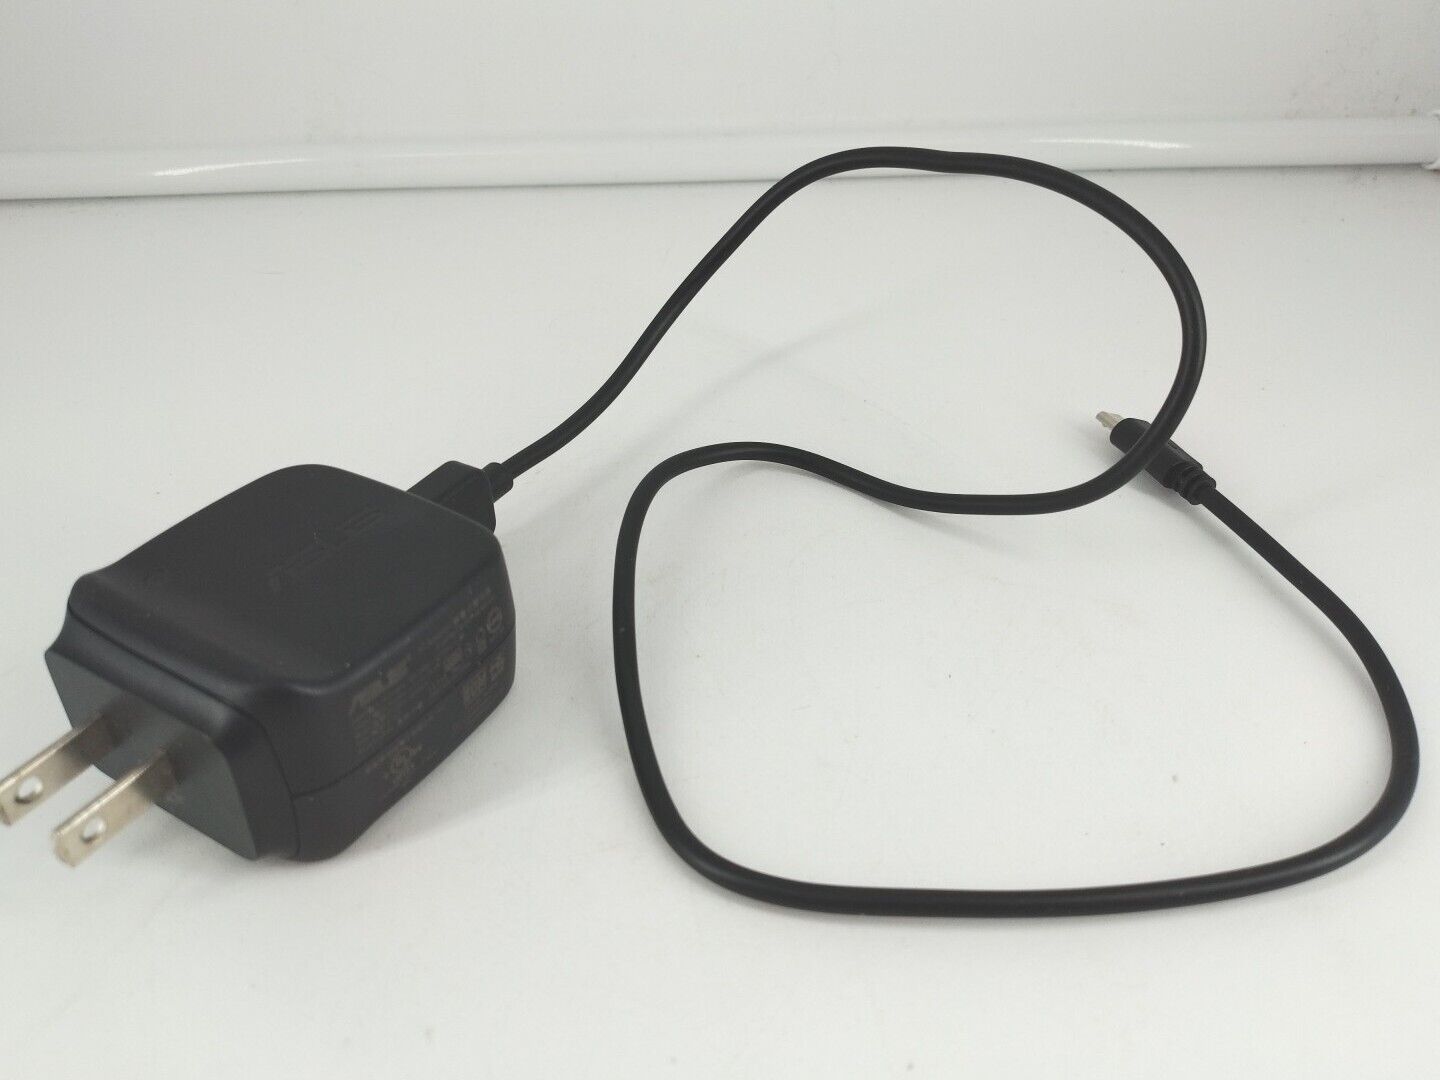 Original ASUS AC ADAPTER AD83531 FOR GOOGLE 2AMP POWER BRICK W/micro Cable